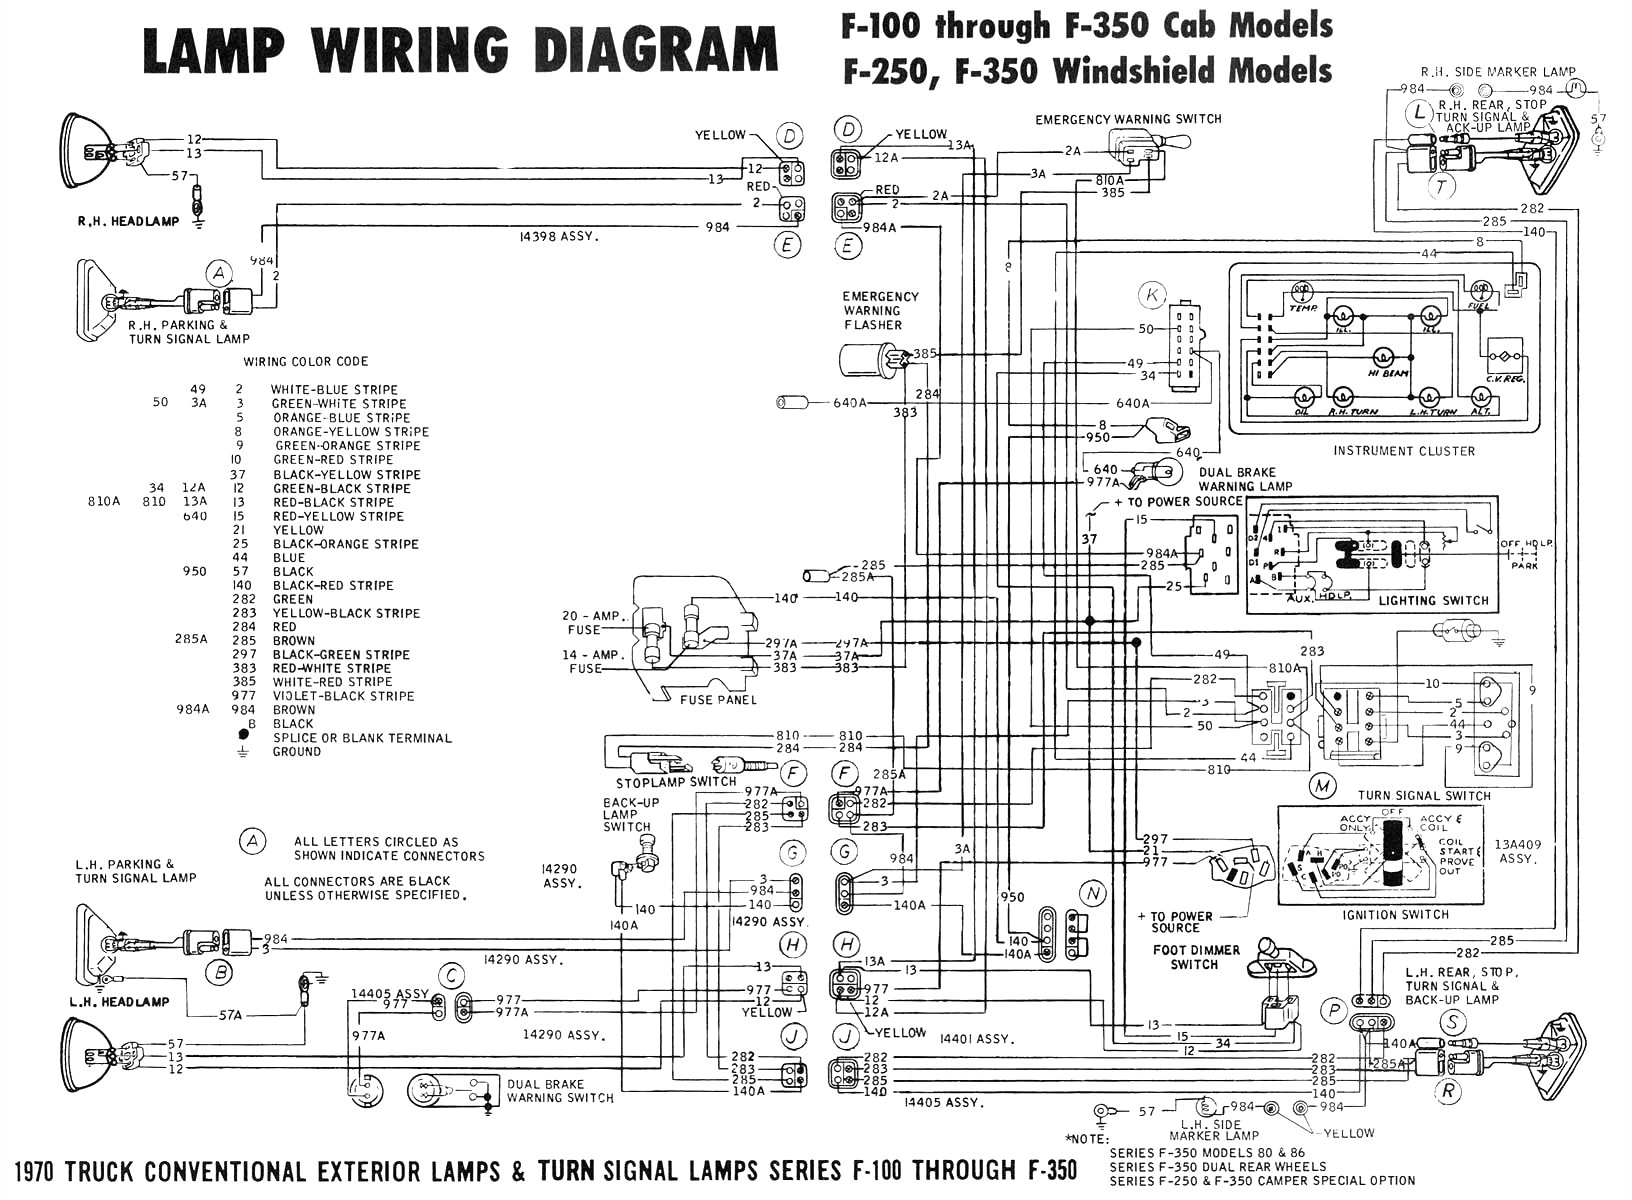 Wiring Diagrams for Trailer Lights Wiring Diagram Trailer Lights ford Transit Auto Wiring Diagram